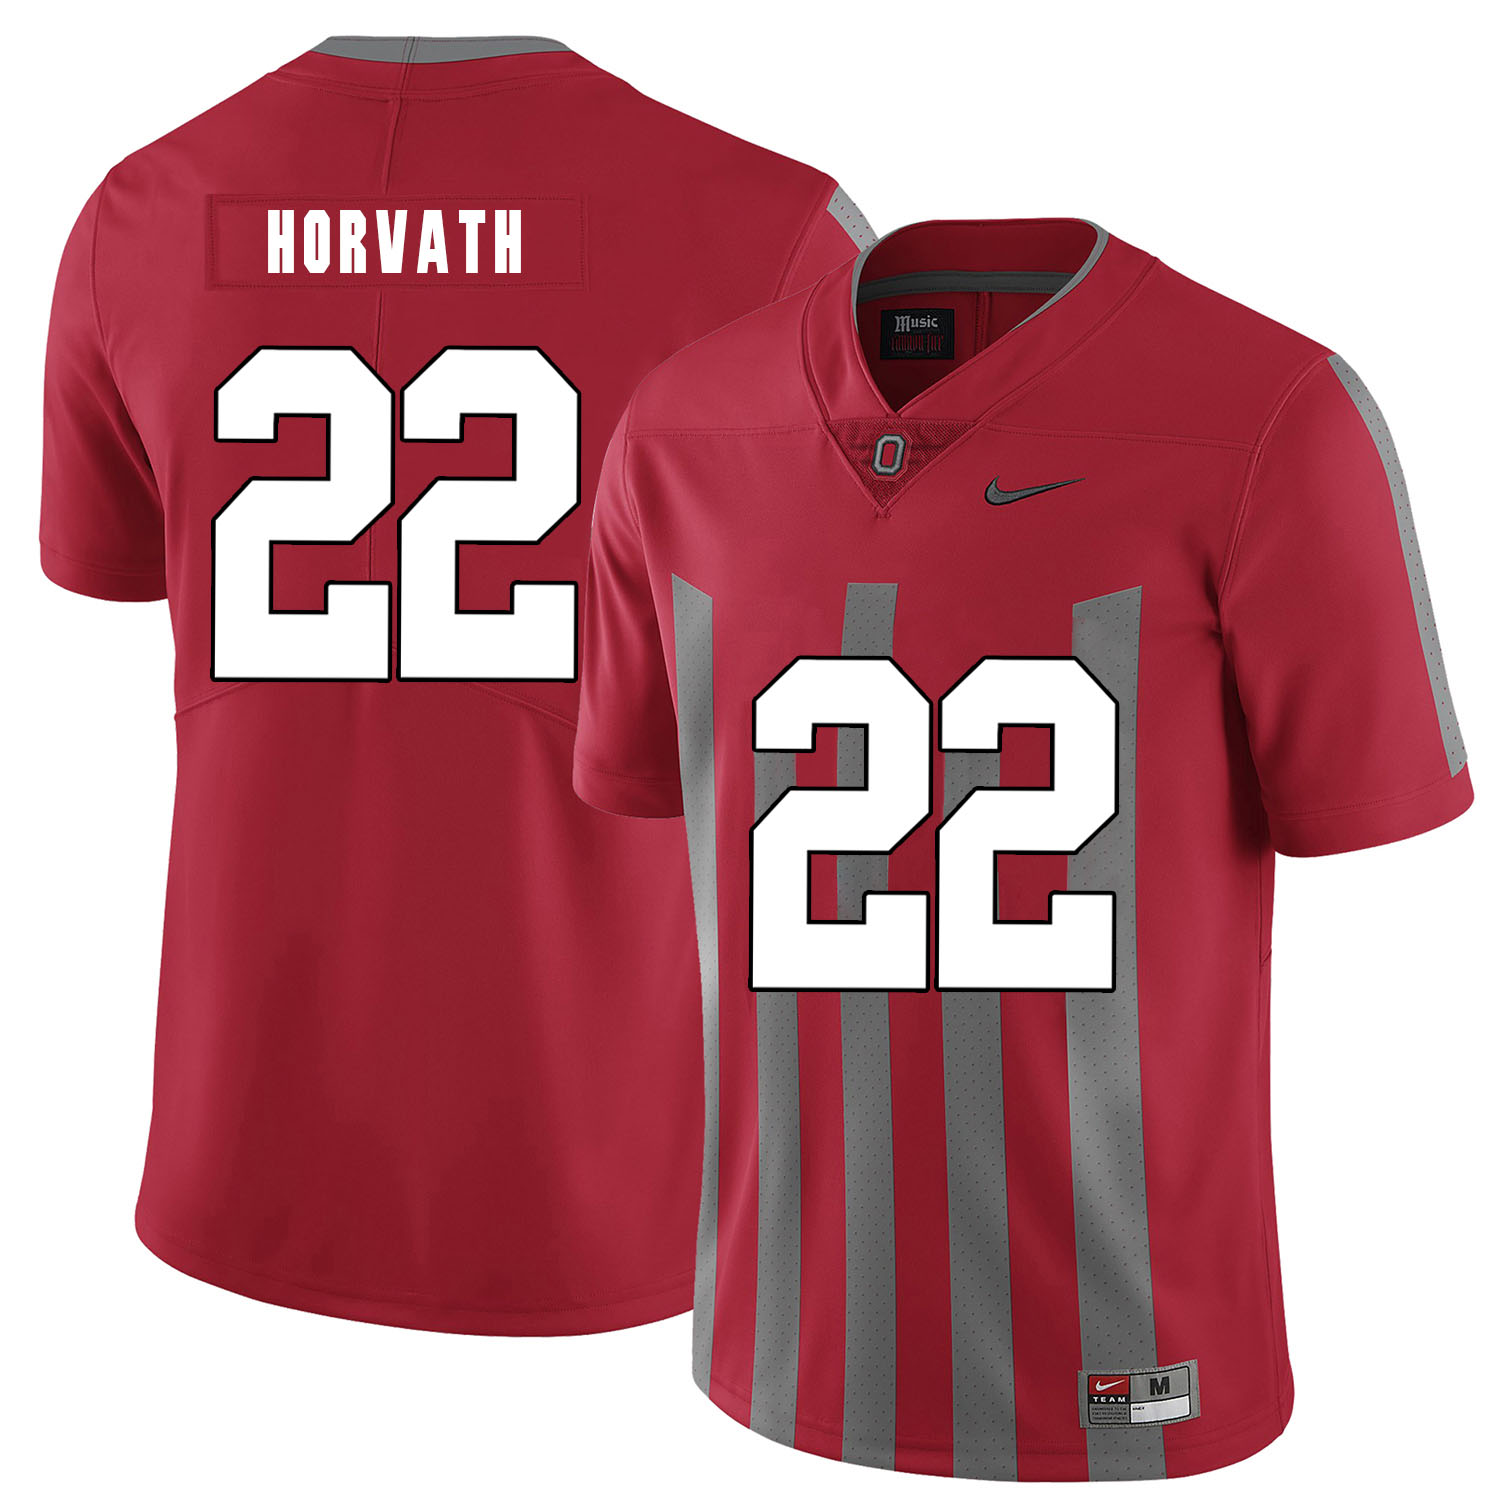 Ohio State Buckeyes 22 Les Horvath Red Elite Nike College Football Jersey